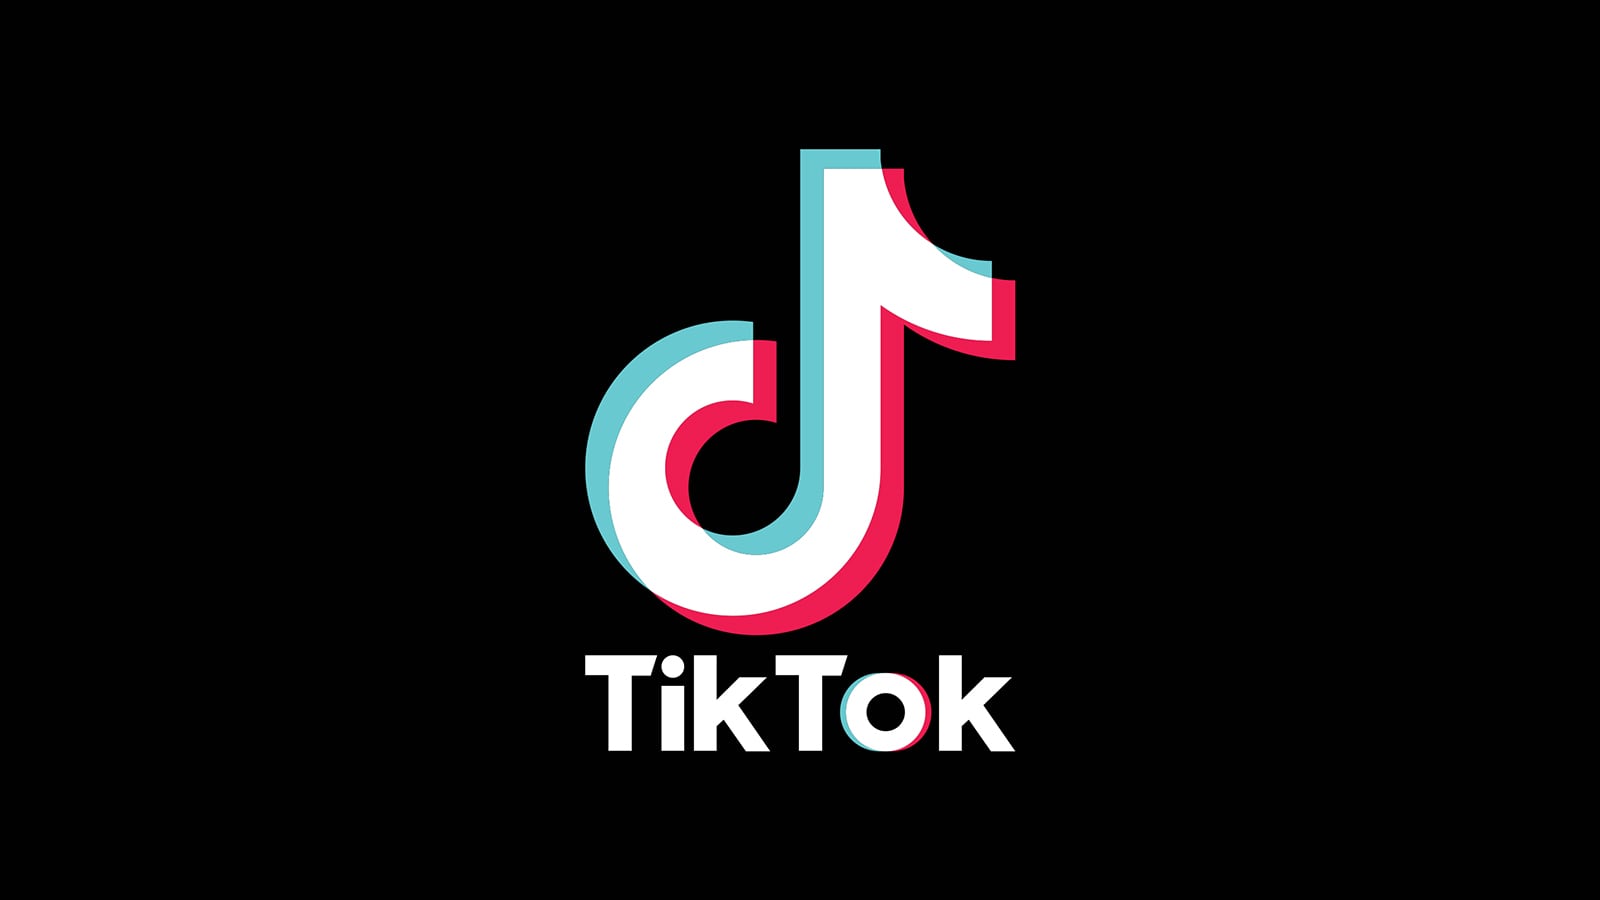 TikTok now lets users receive direct messages from everyone, just like Instagram